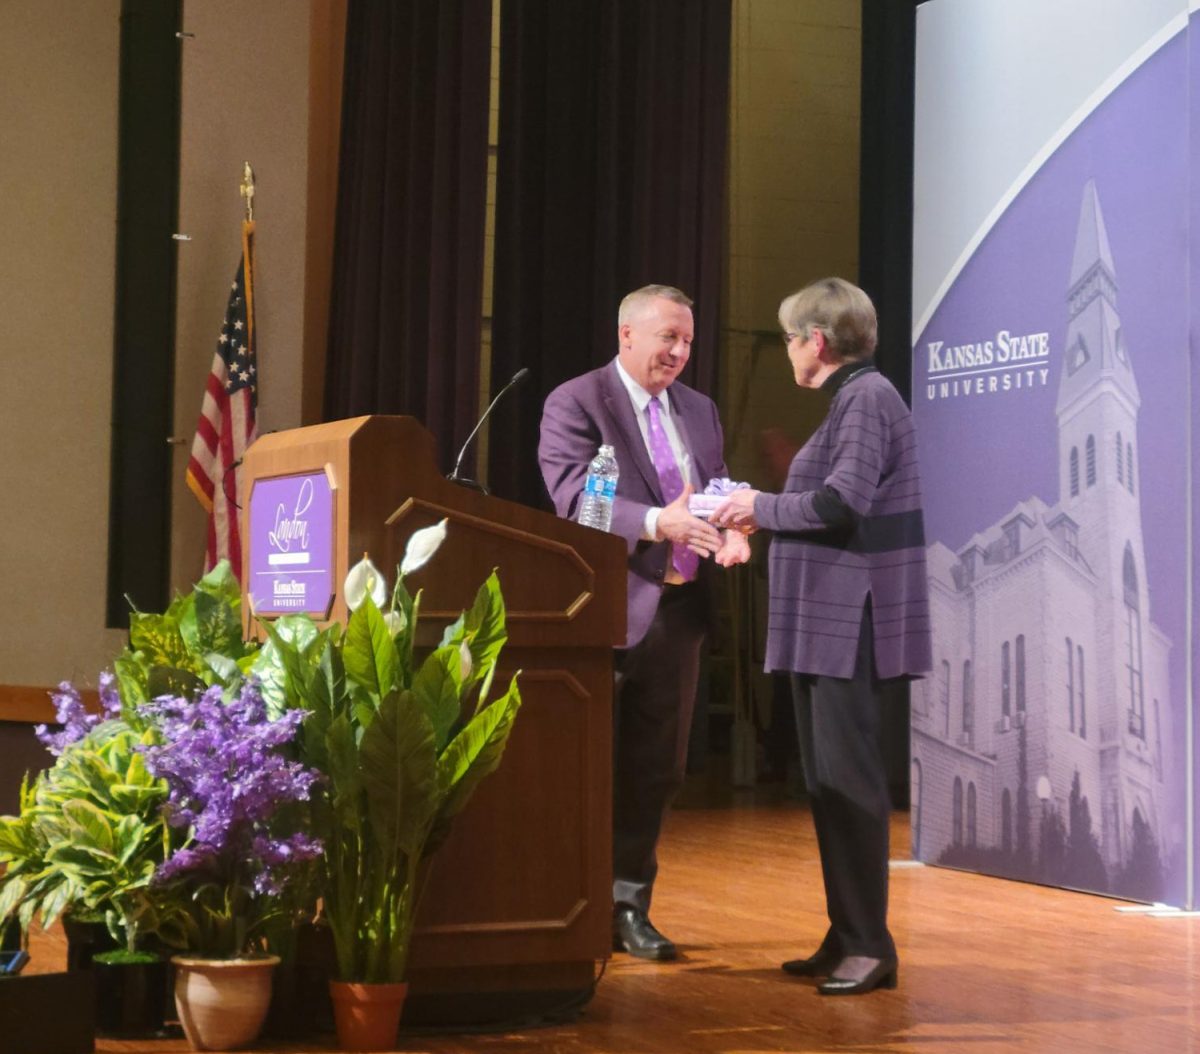 President Linton shakes the hand of Gov. Laura Kelly after her speech for the Landon Lecture Series.